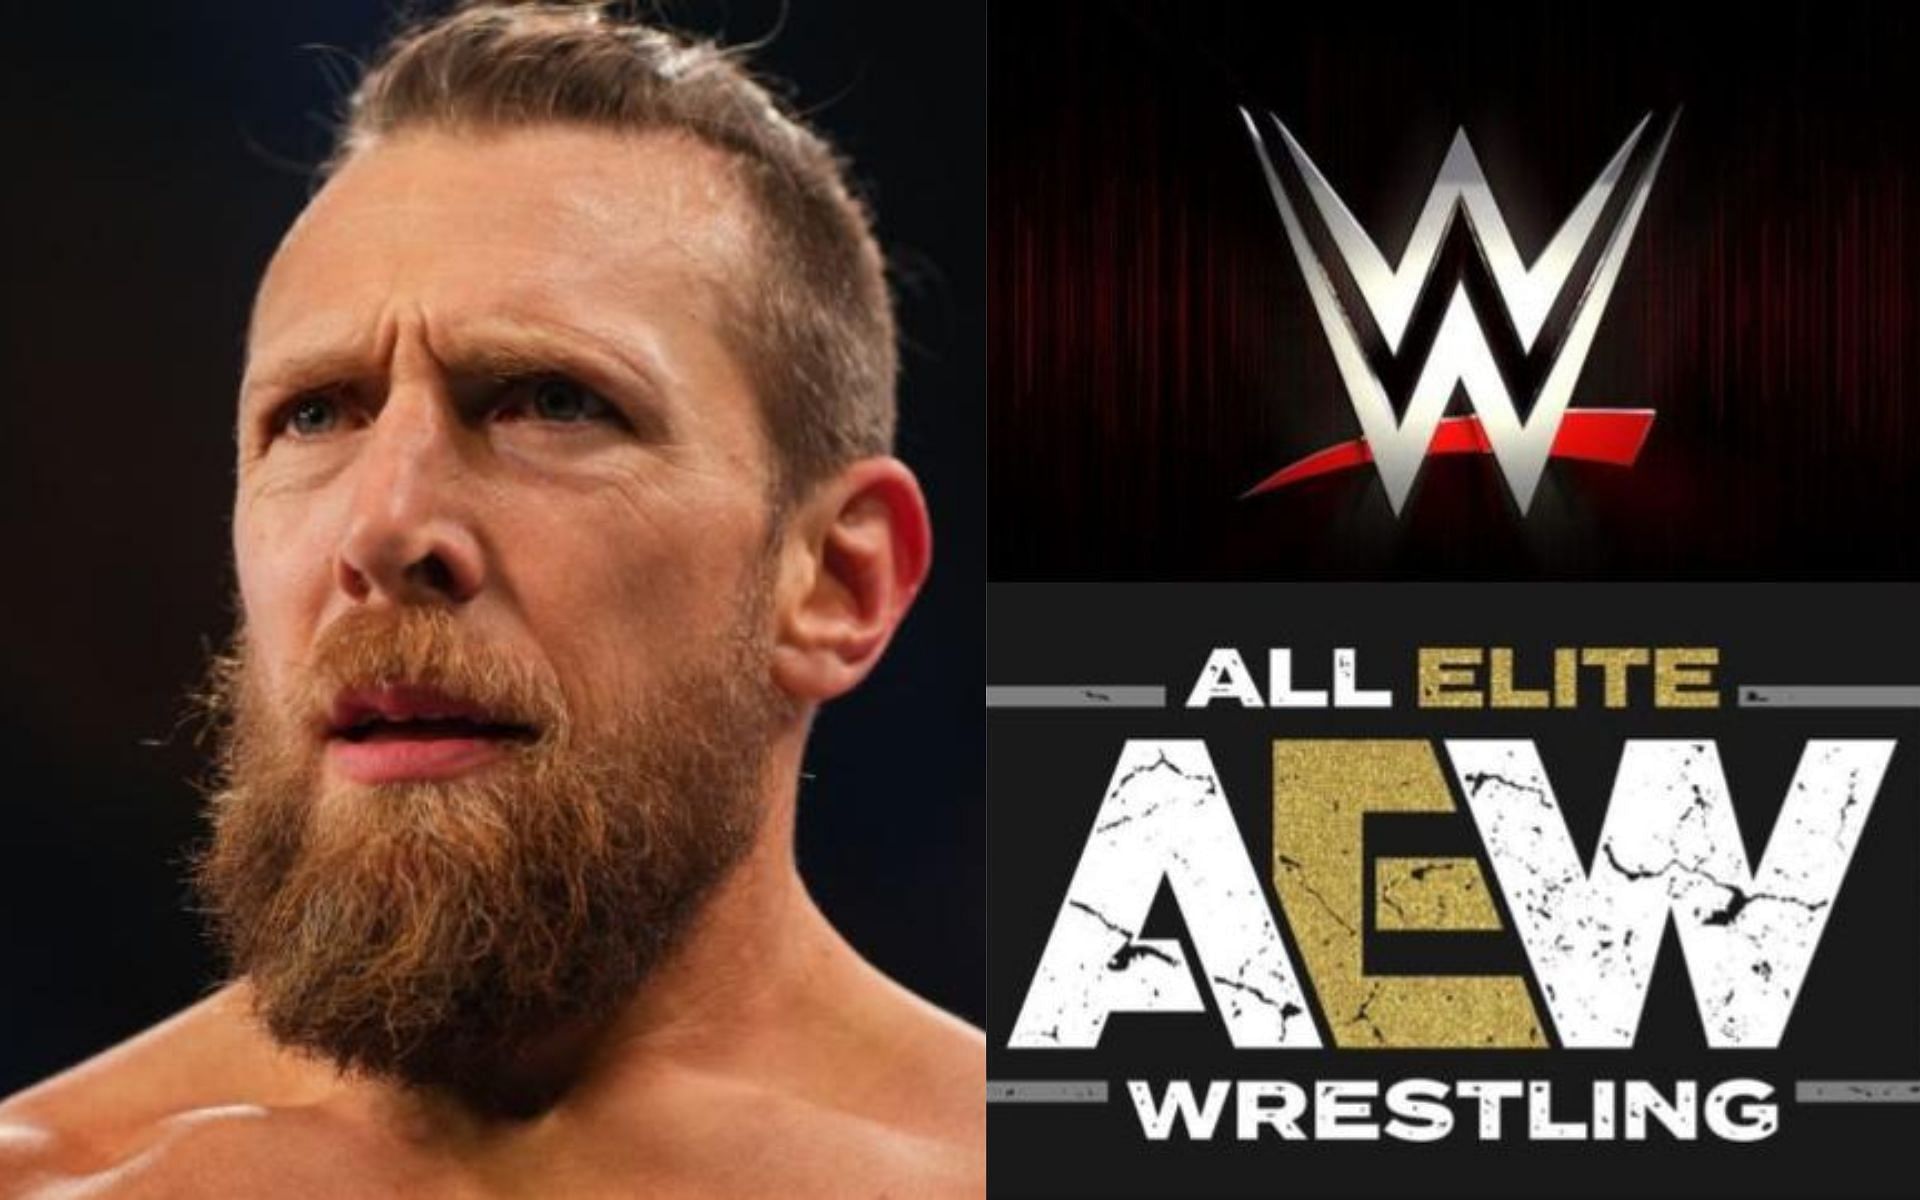 Bryan Danielson (left) and AEW and WWE logos (right).